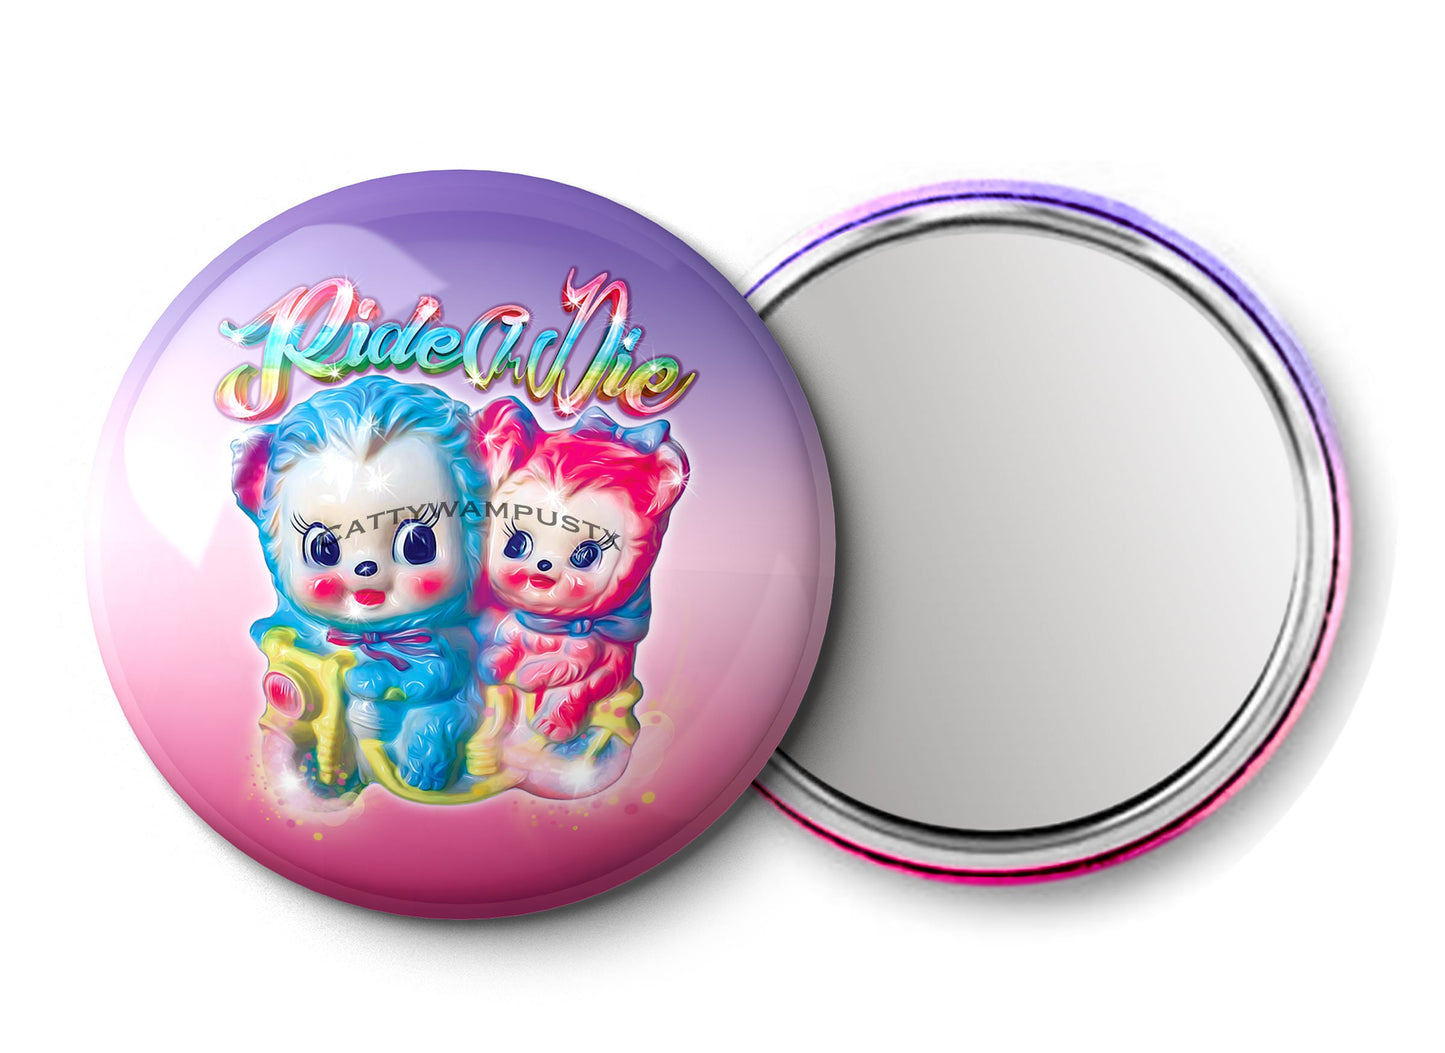 Best Friends - Pocket Mirror, Magnet, and or  Pin Back Button